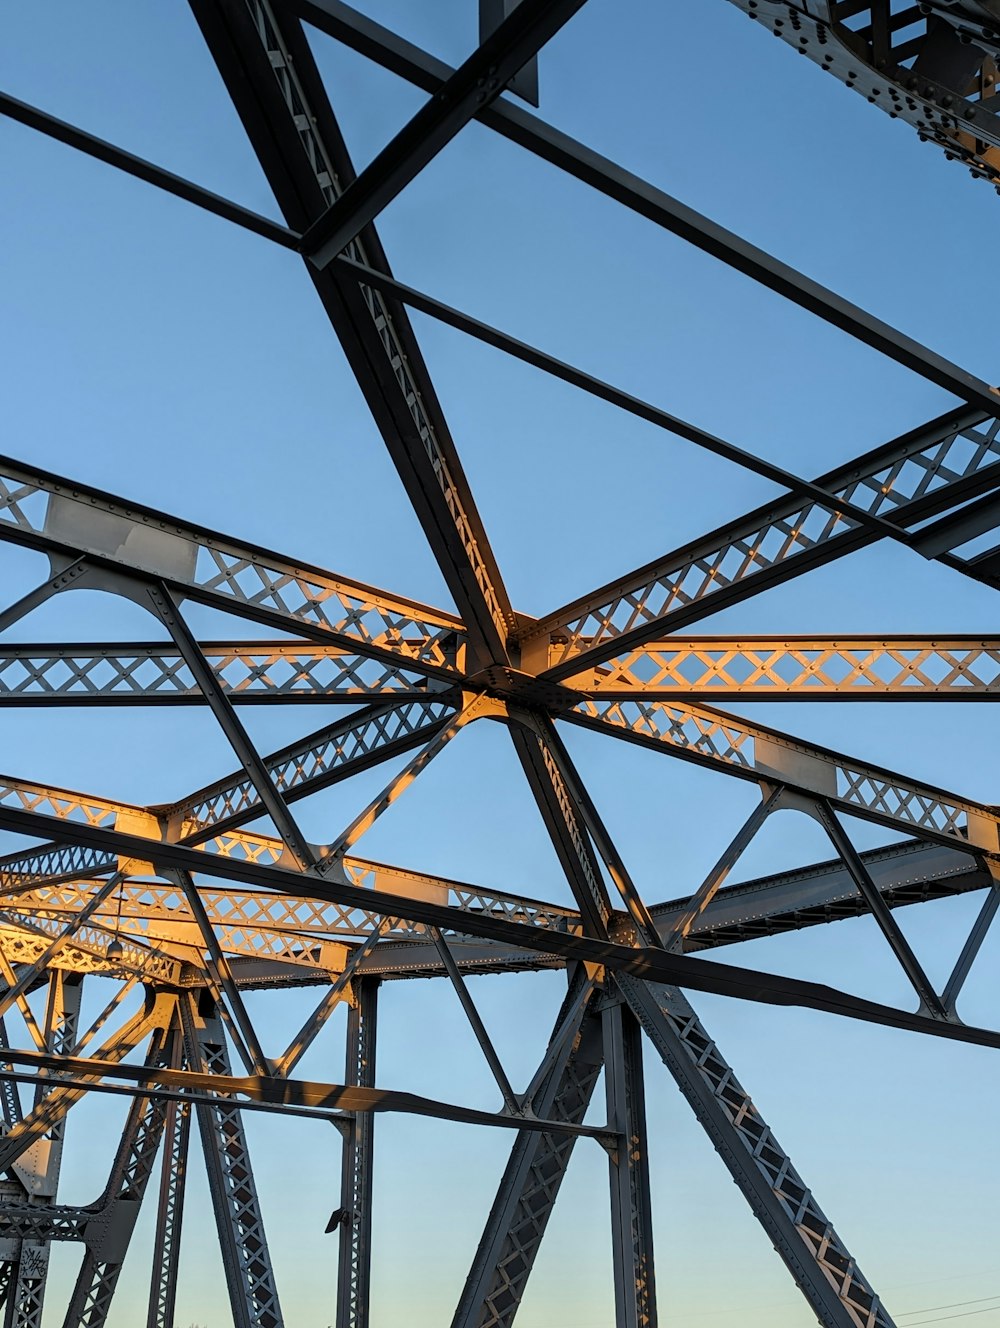 a view of a metal structure from below